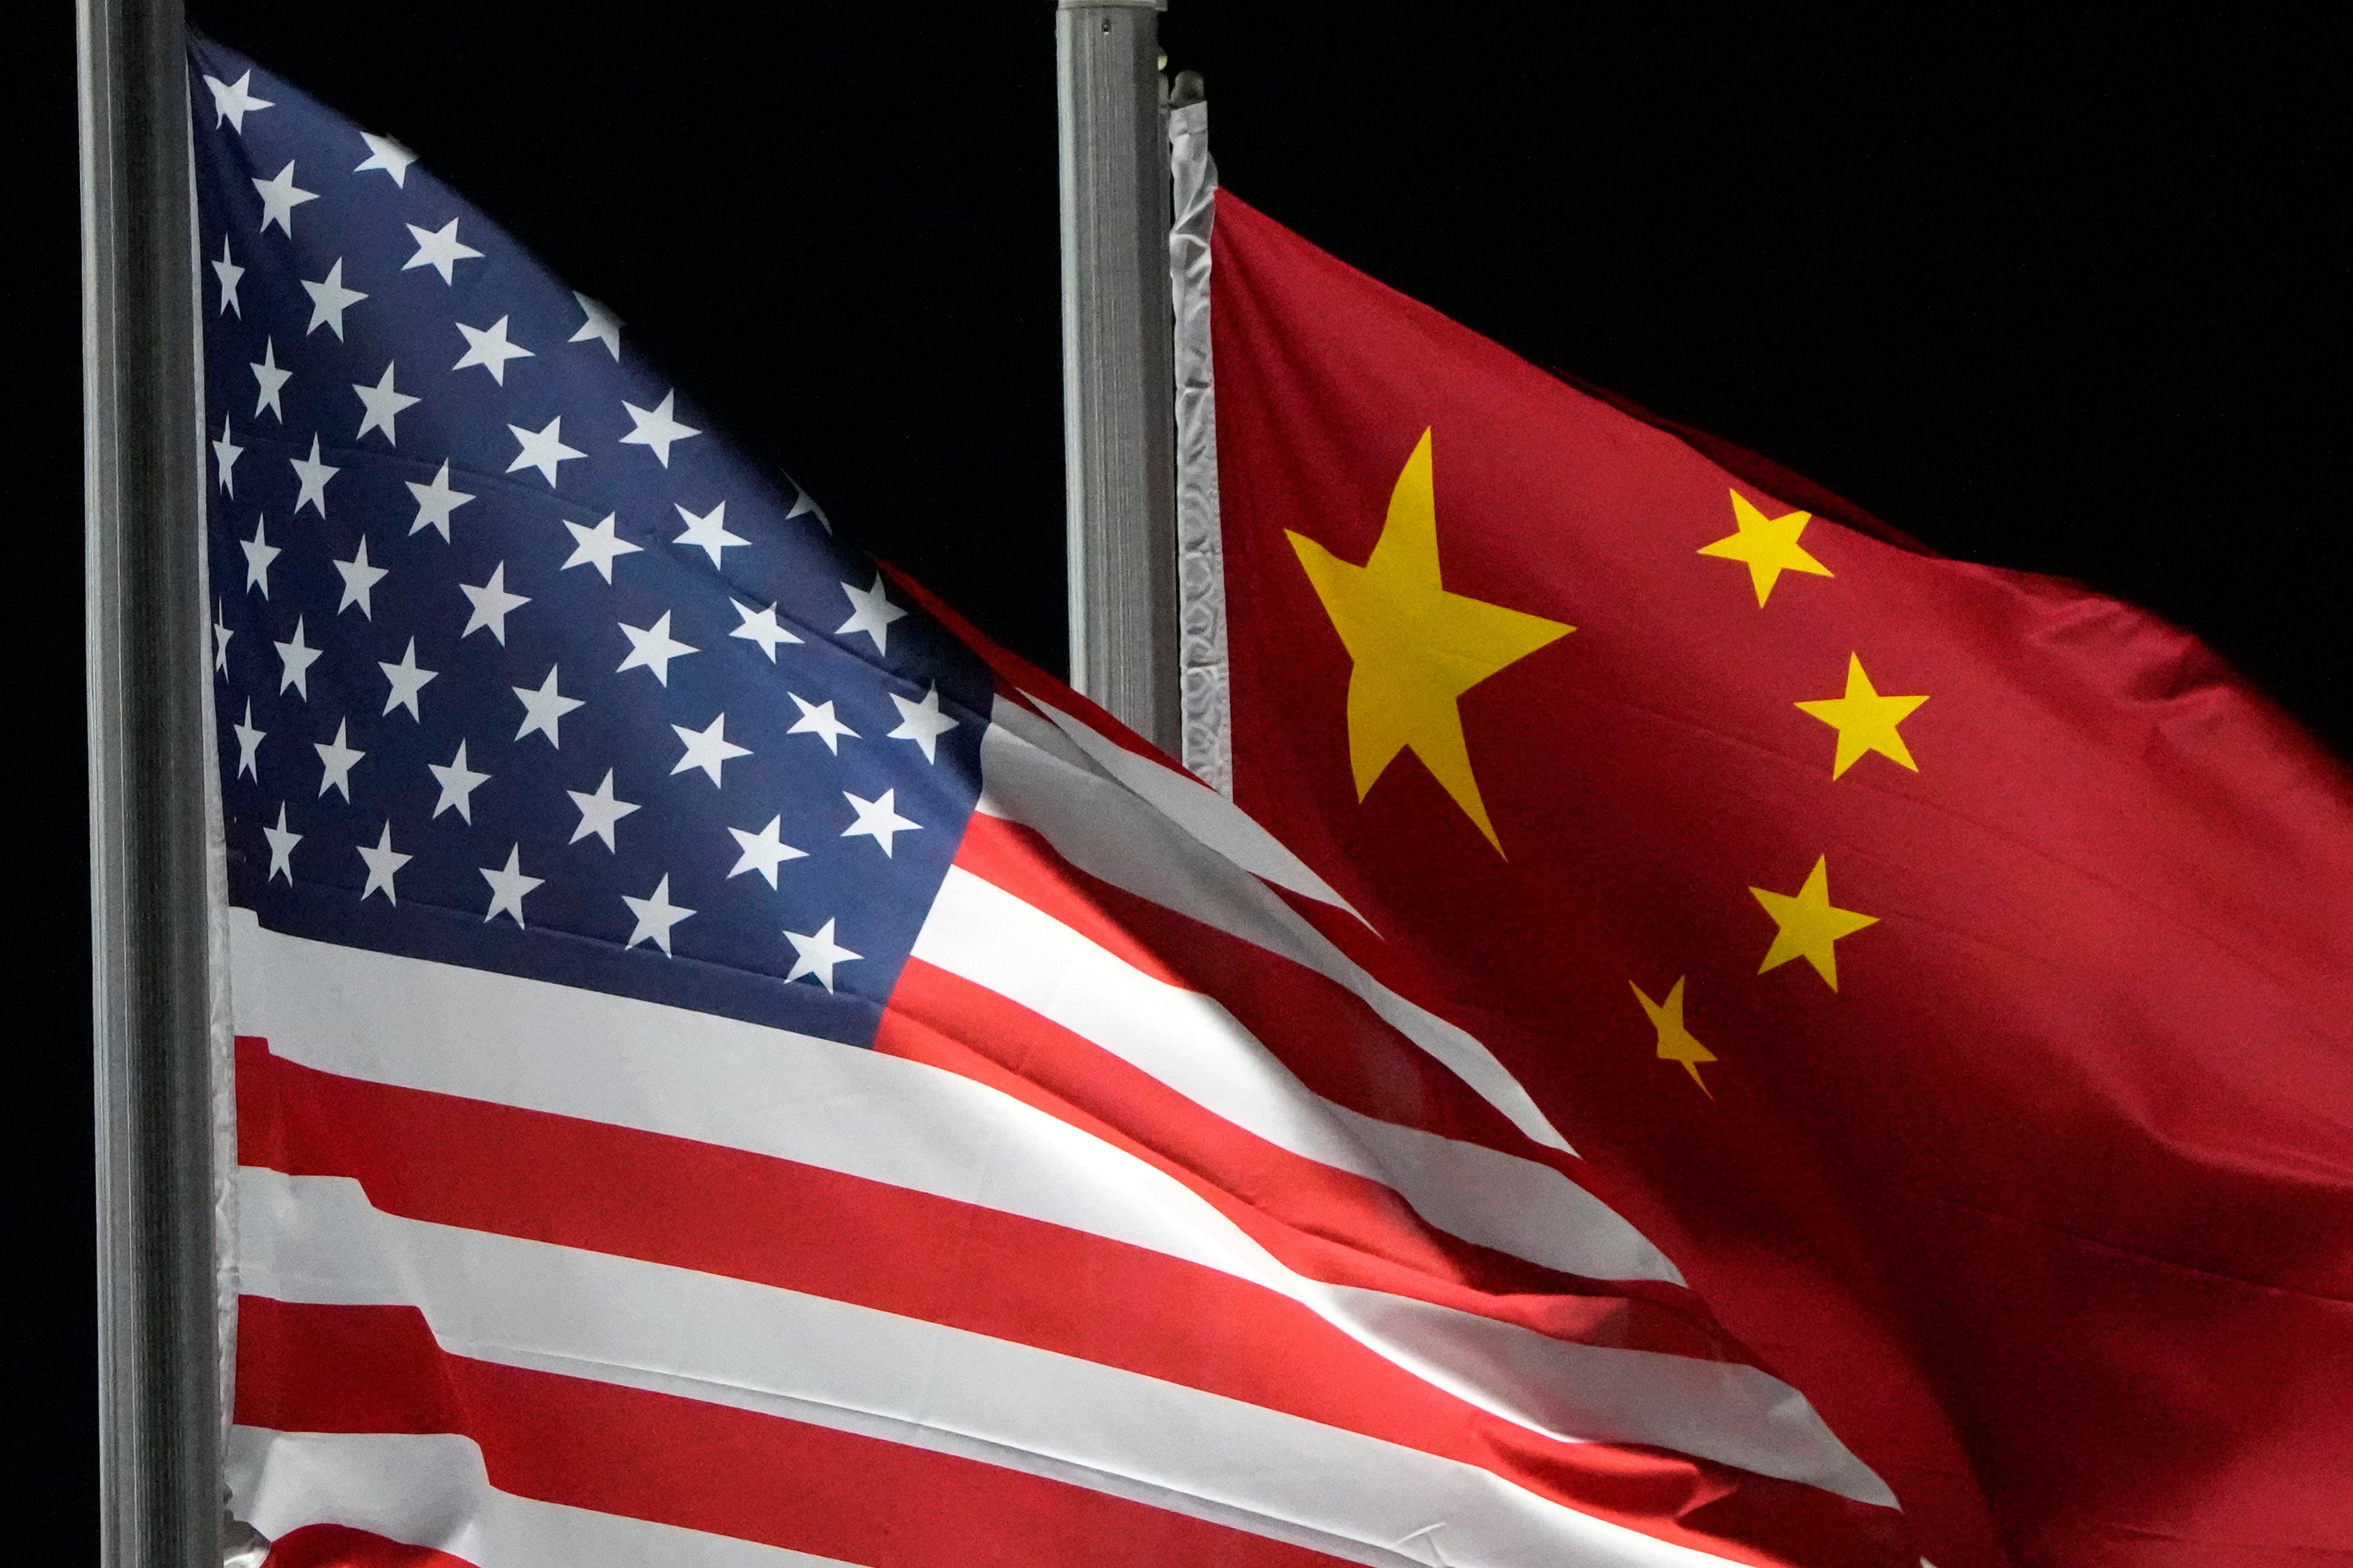 Amid tensions with China some US states are purging Chinese companies from their investments